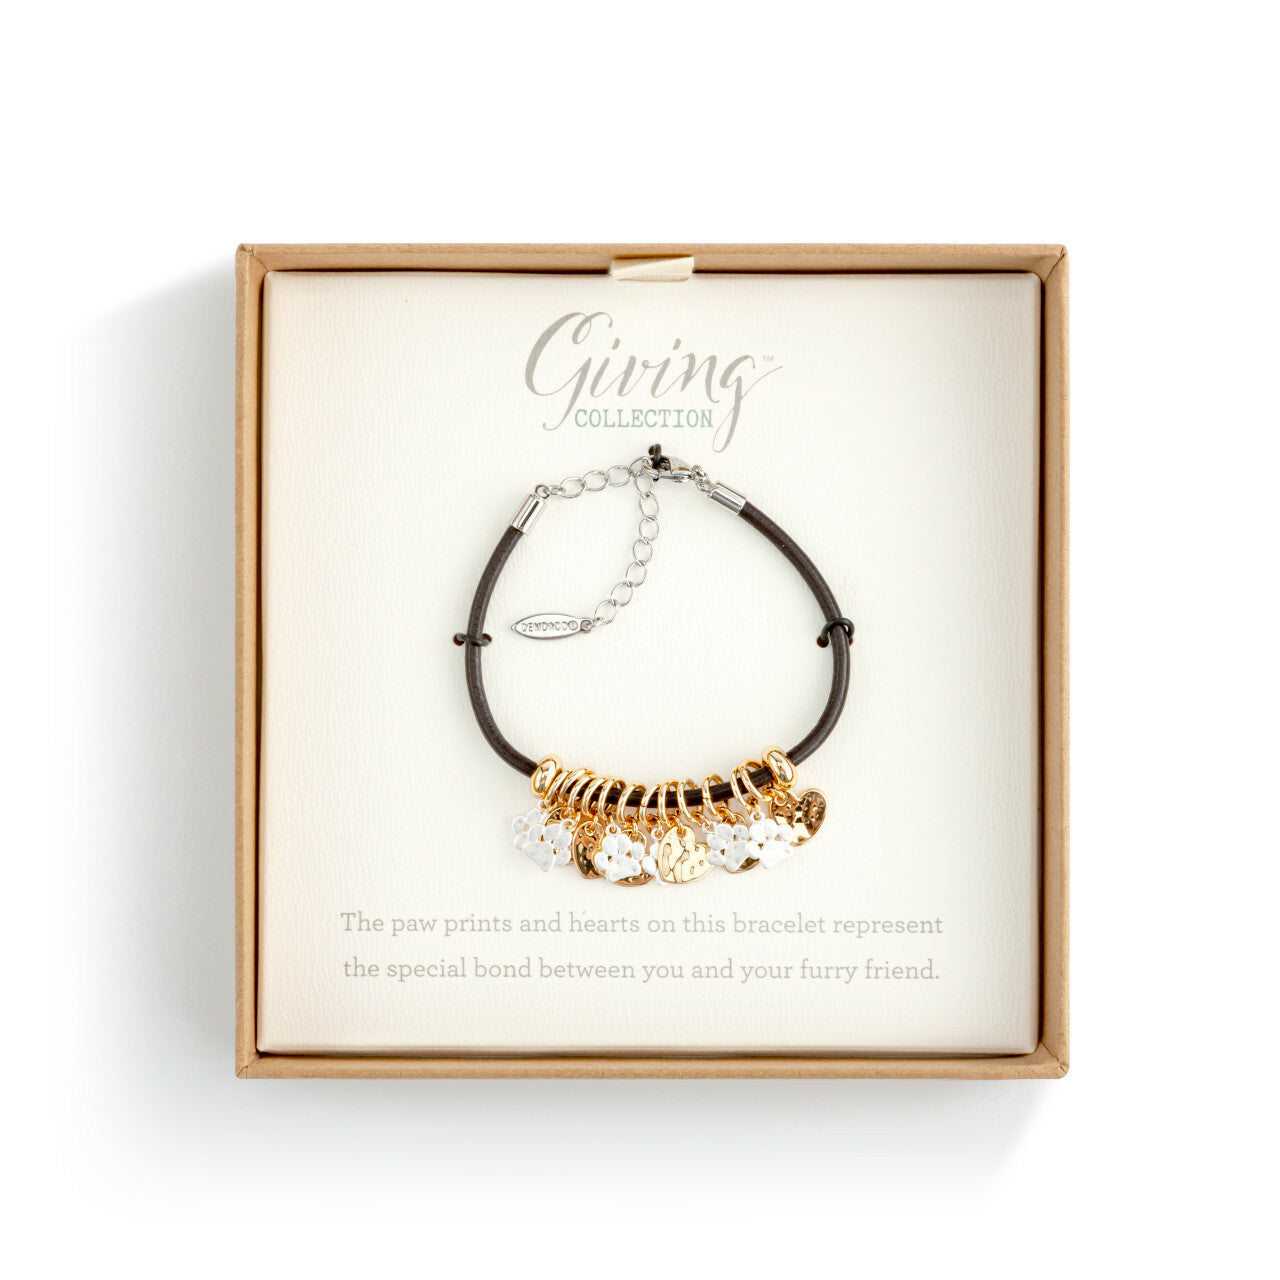 Giving Collection Charm Bracelet - Paw Print and Heart